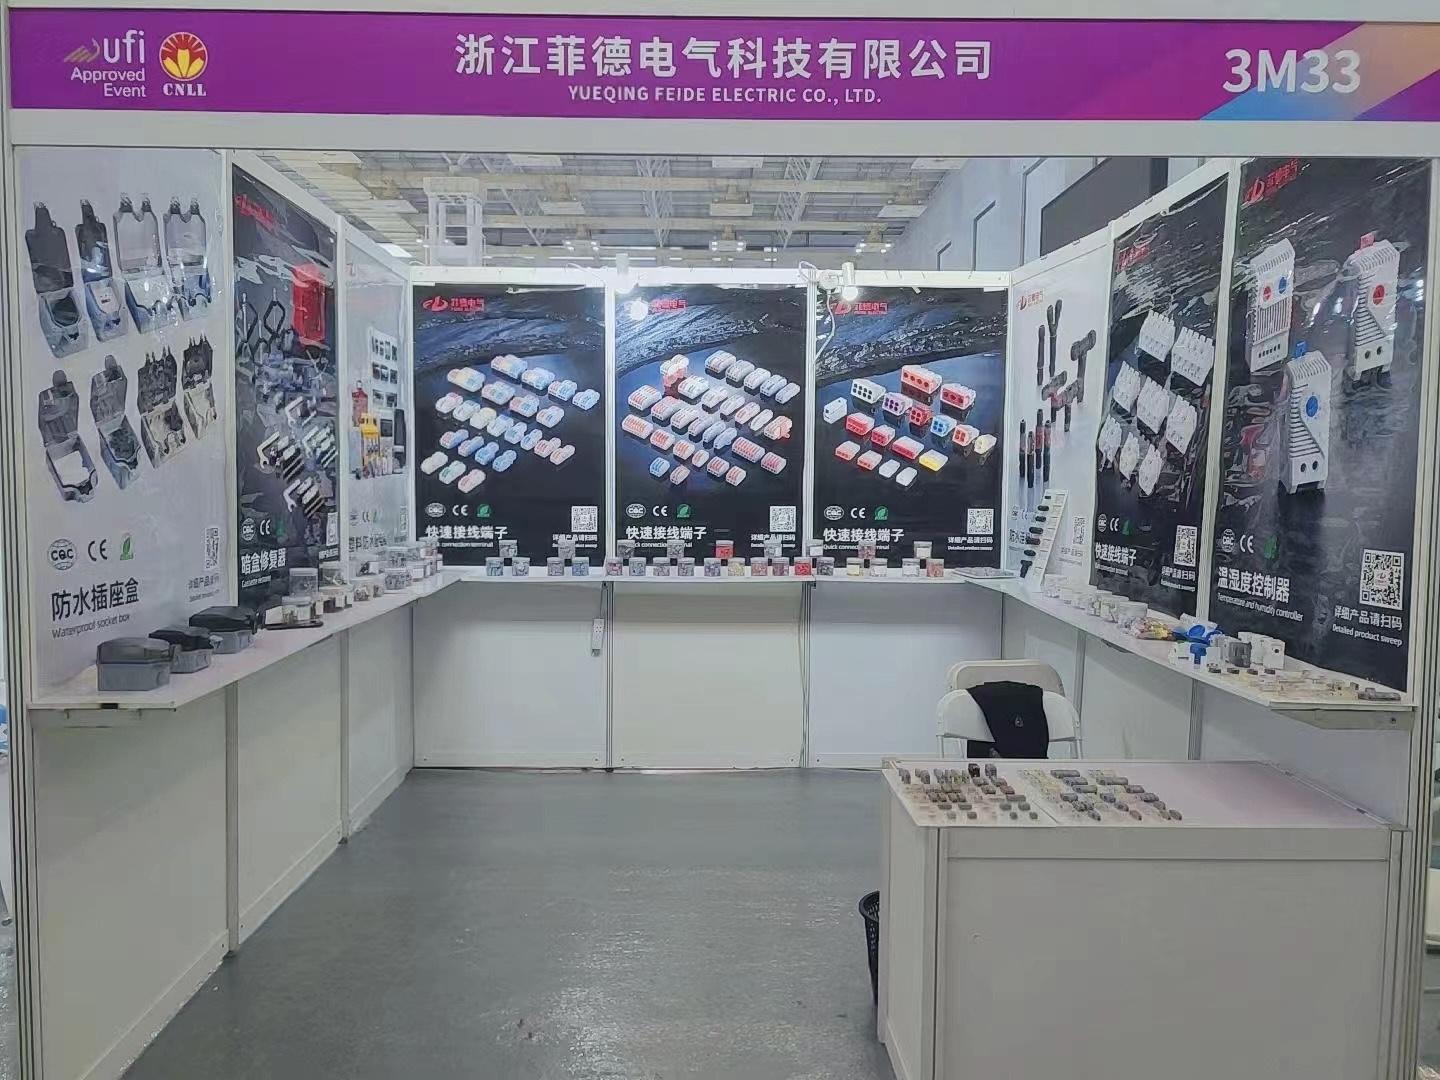 Our company participates in the Ningbo exhibition